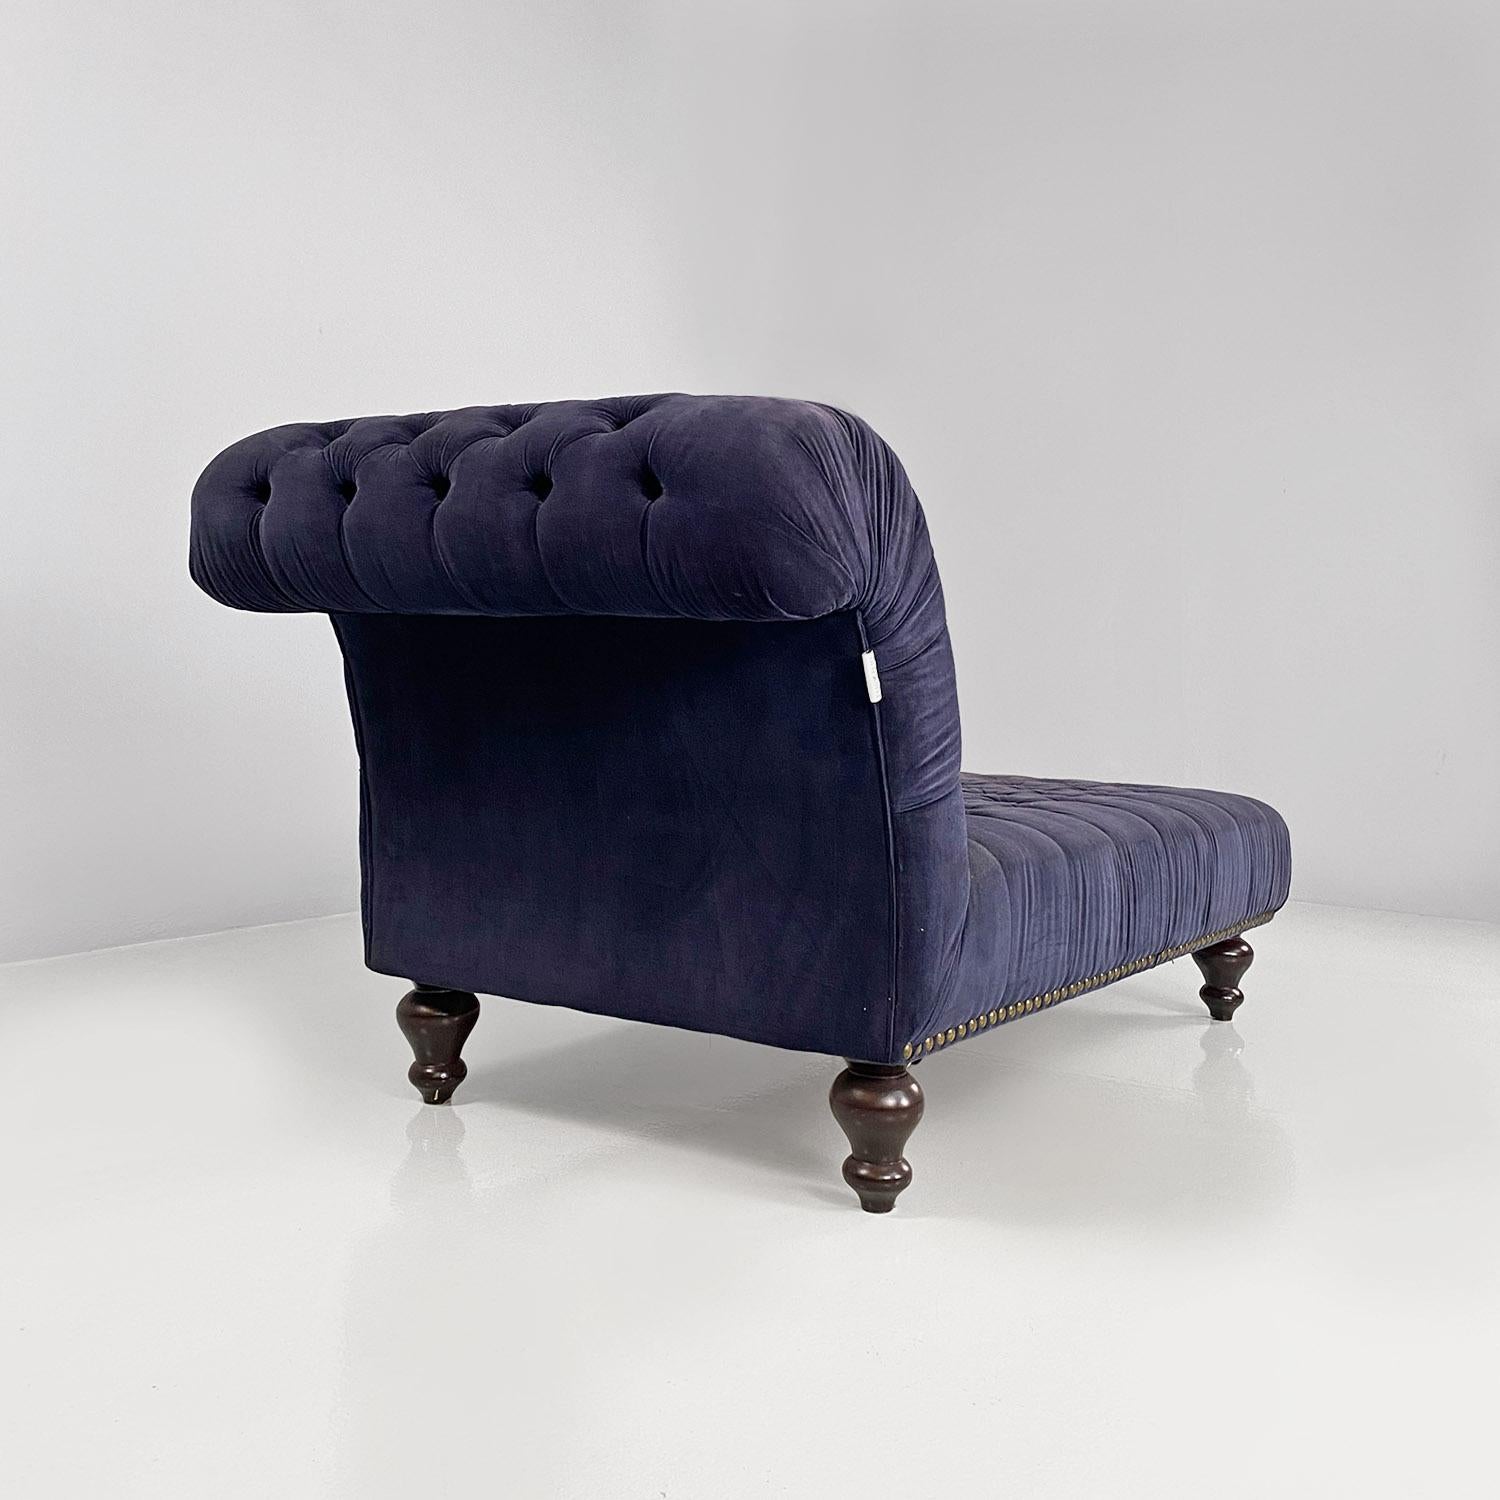 Late 20th Century Italian antique style blue velvet and wood dormeuse or chaise longue, 1980s For Sale